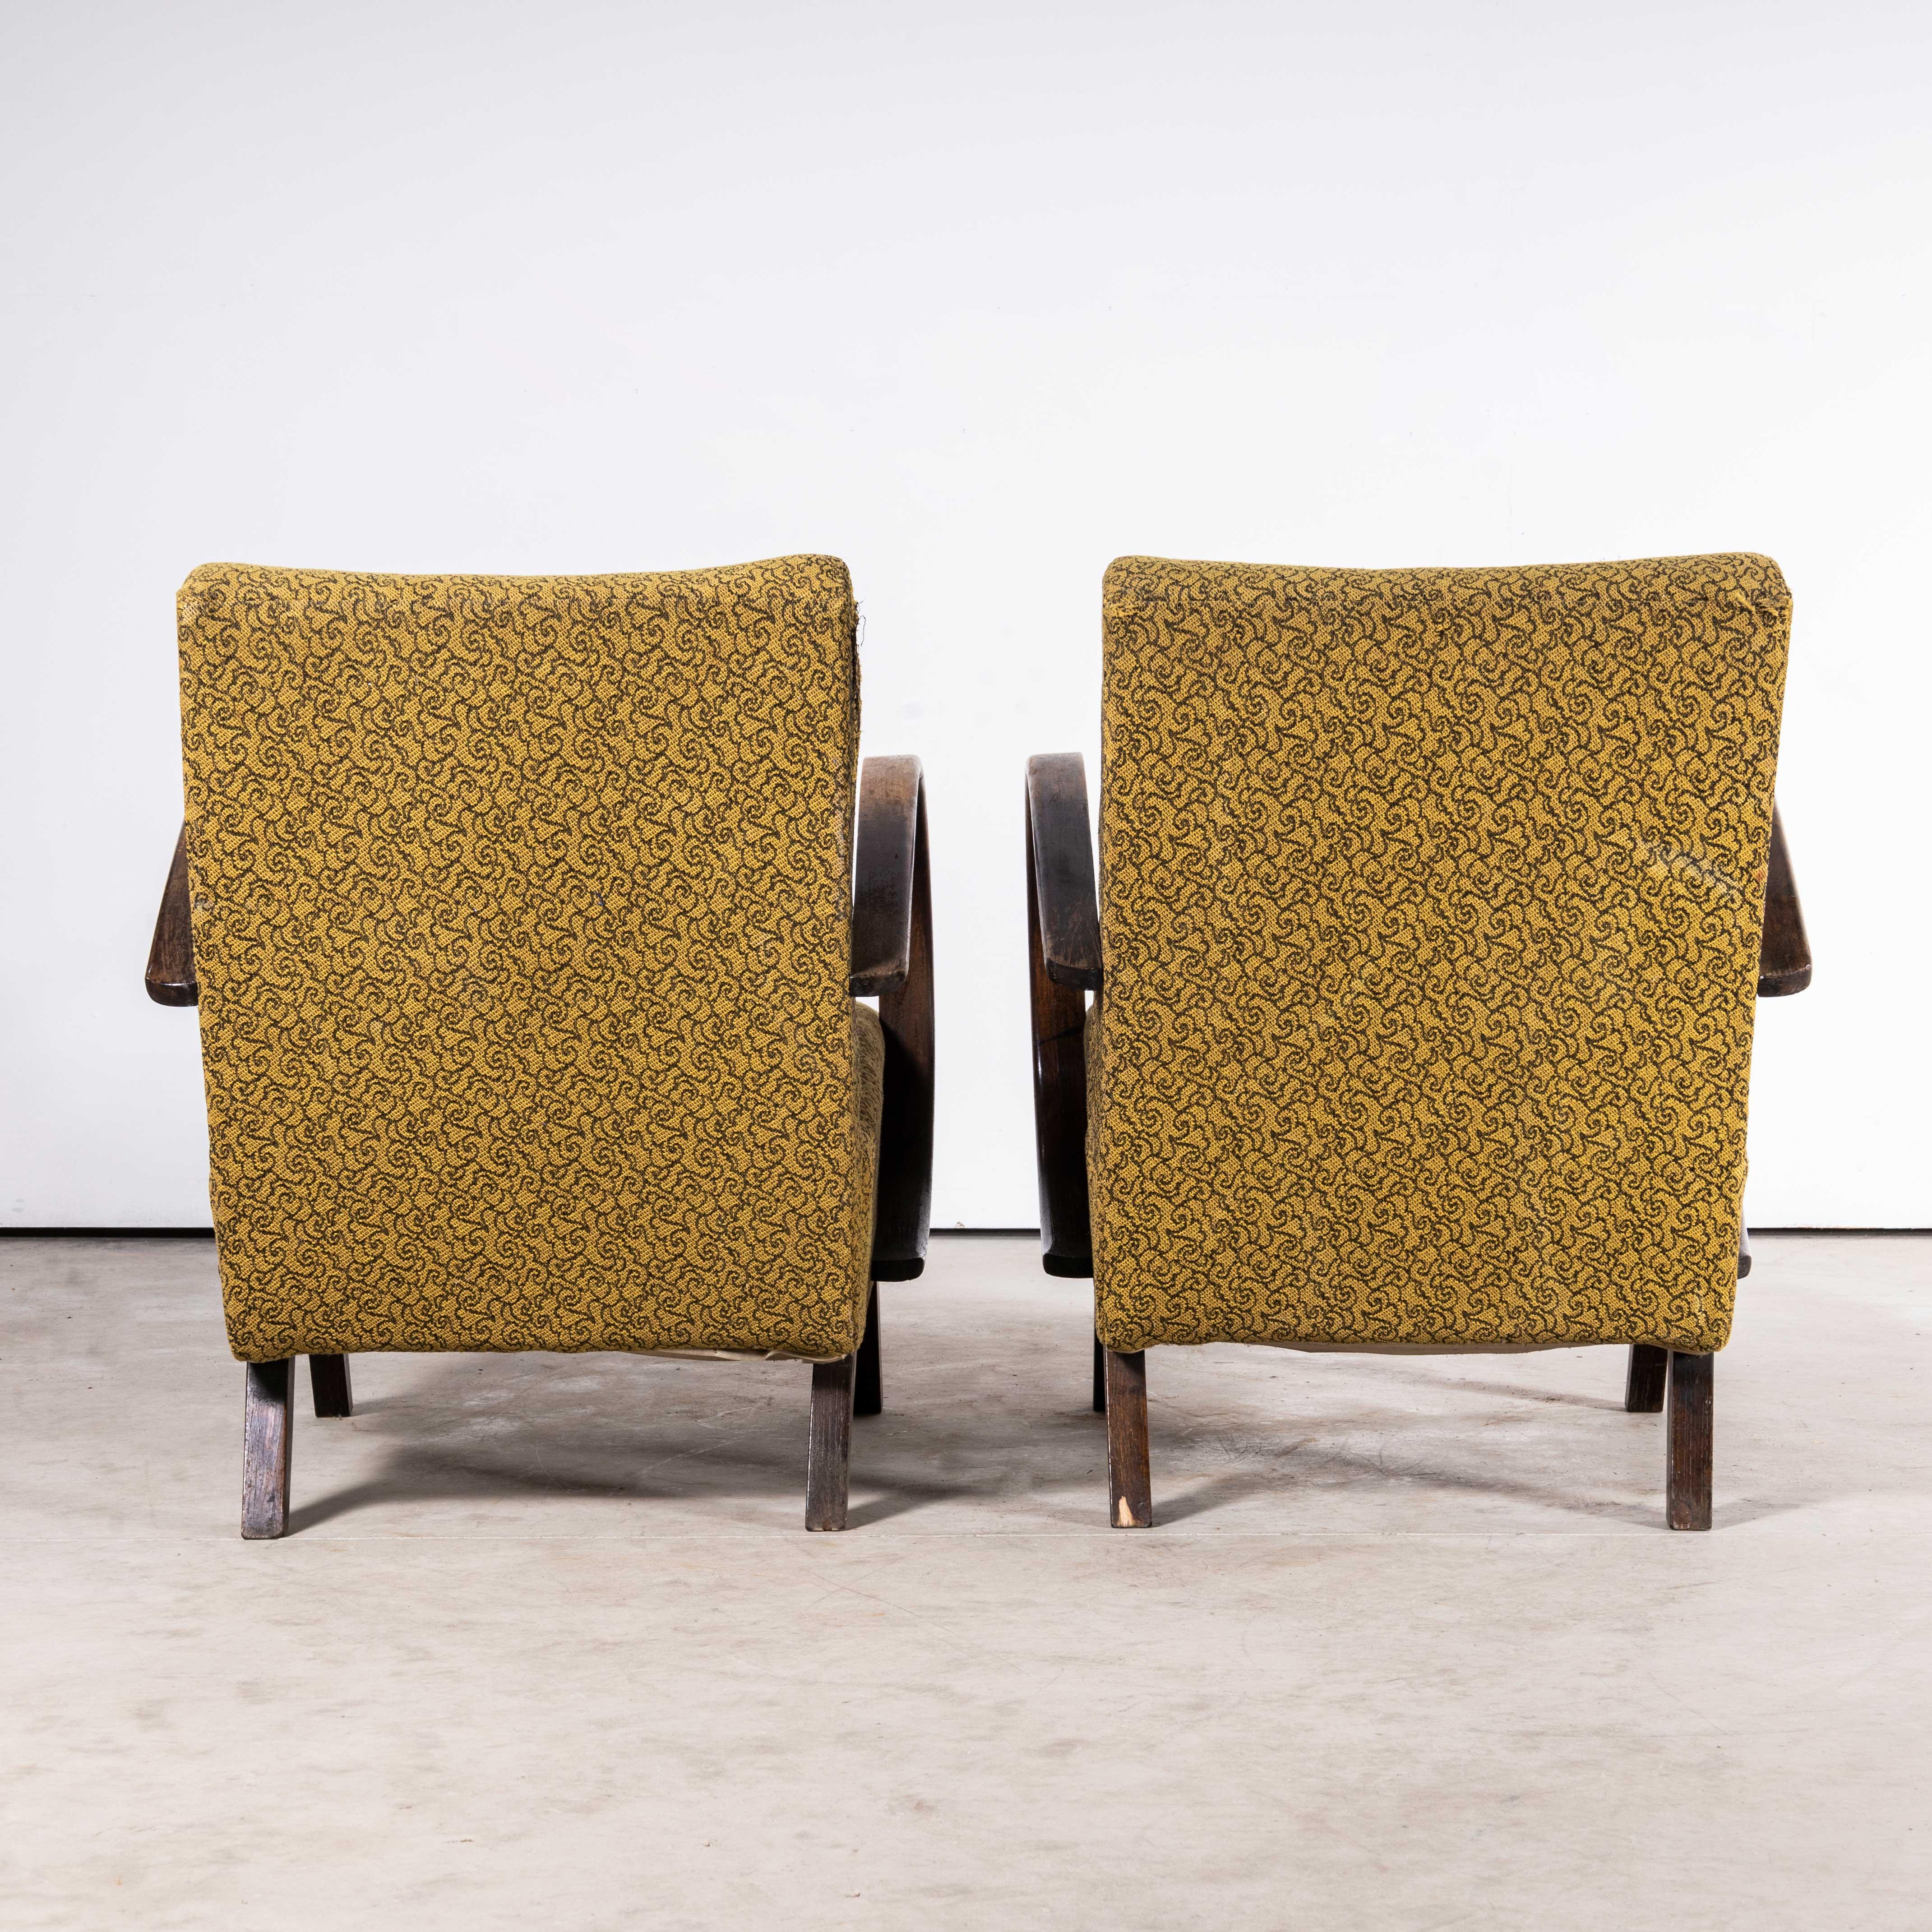 Upholstery 1950's Pair Of Original1950's Patterned Upholstered Armchairs - Jindrich Halabal